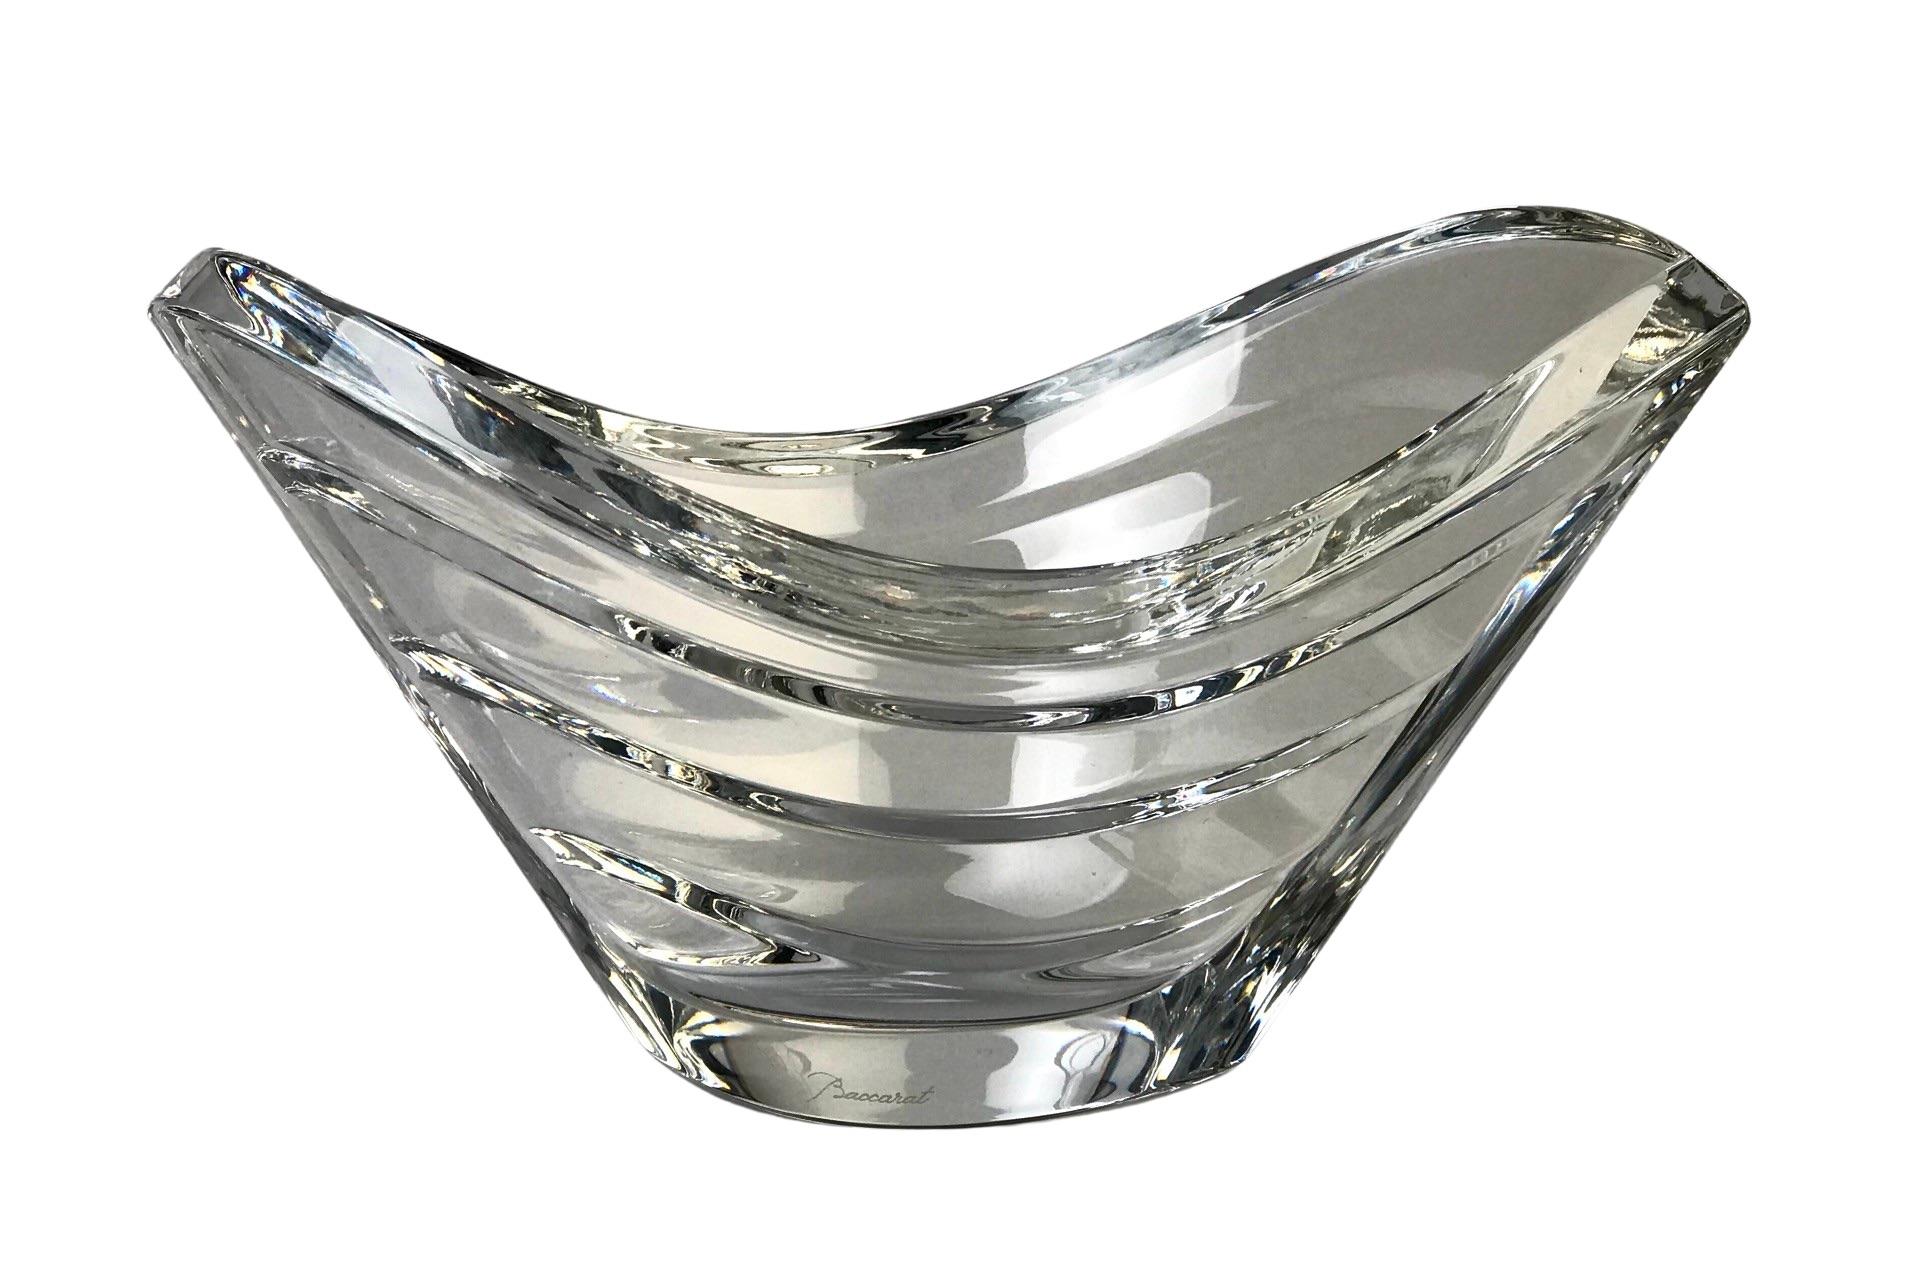 A luxurious bowl from crystal-sculpting experts Baccarat for all your hosting needs.
The edge of the vase dips like a gully, and the form is echoed throughout Clear crystal with undulations traveling down the side in five tiers. Designed for